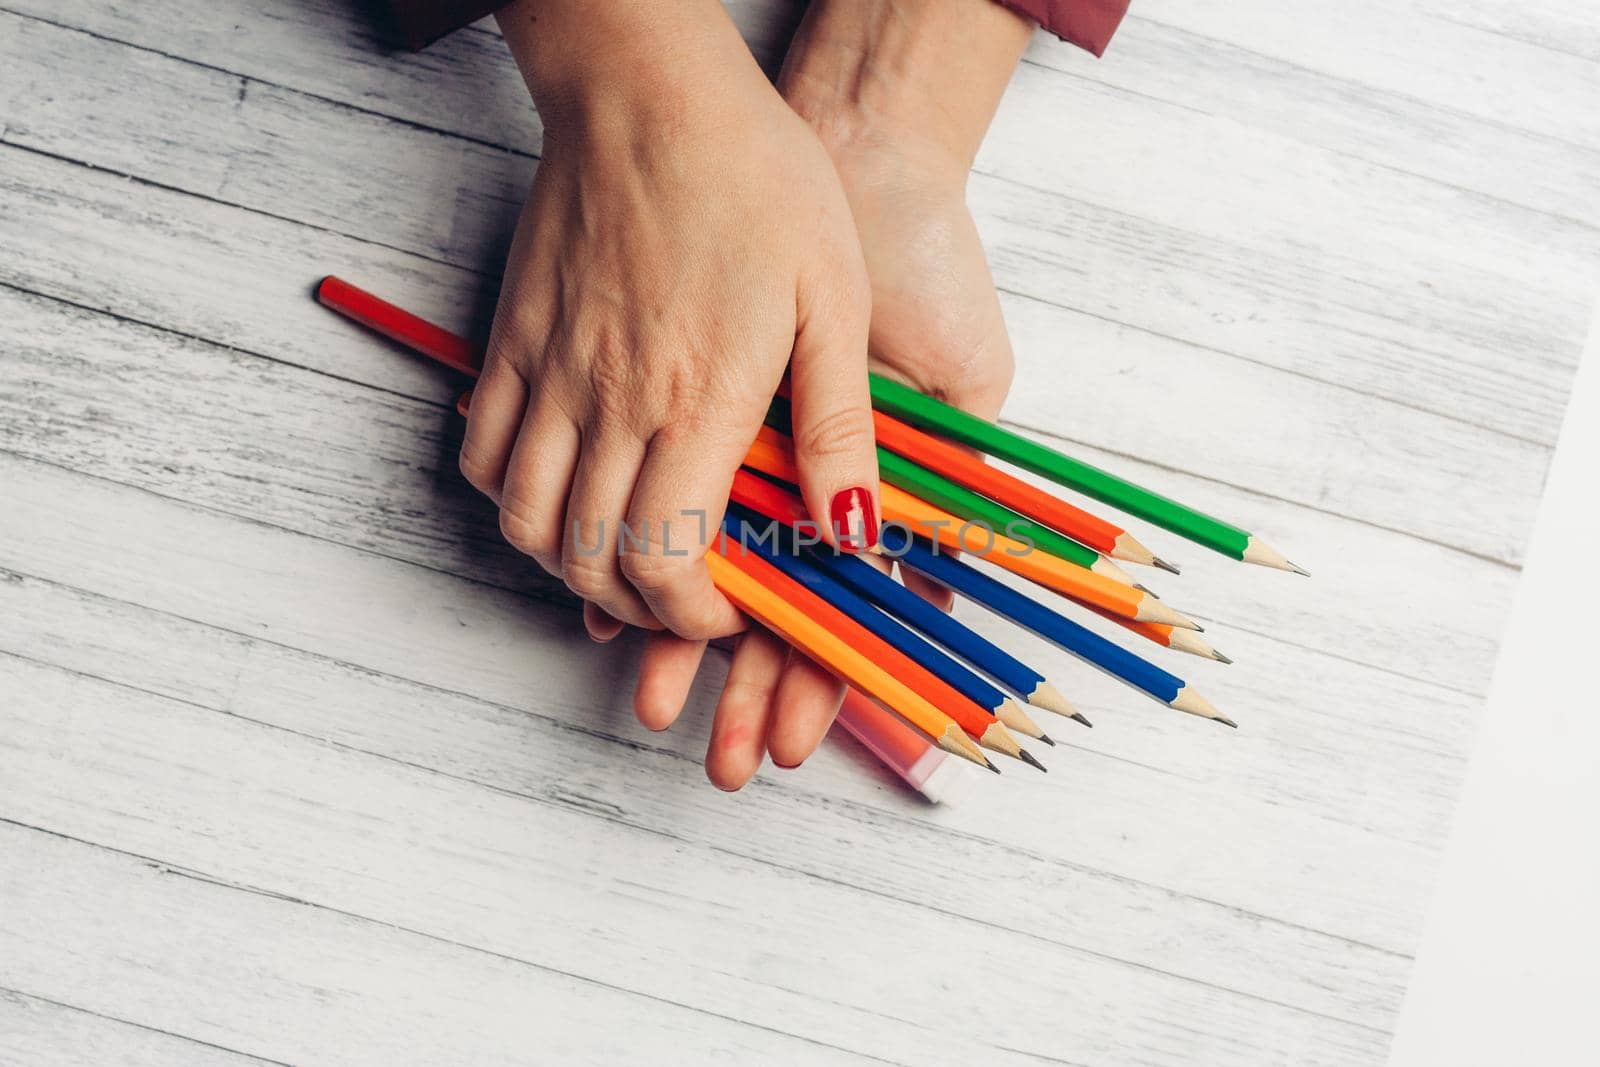 colored pencils in female hands on a wooden background close up by SHOTPRIME